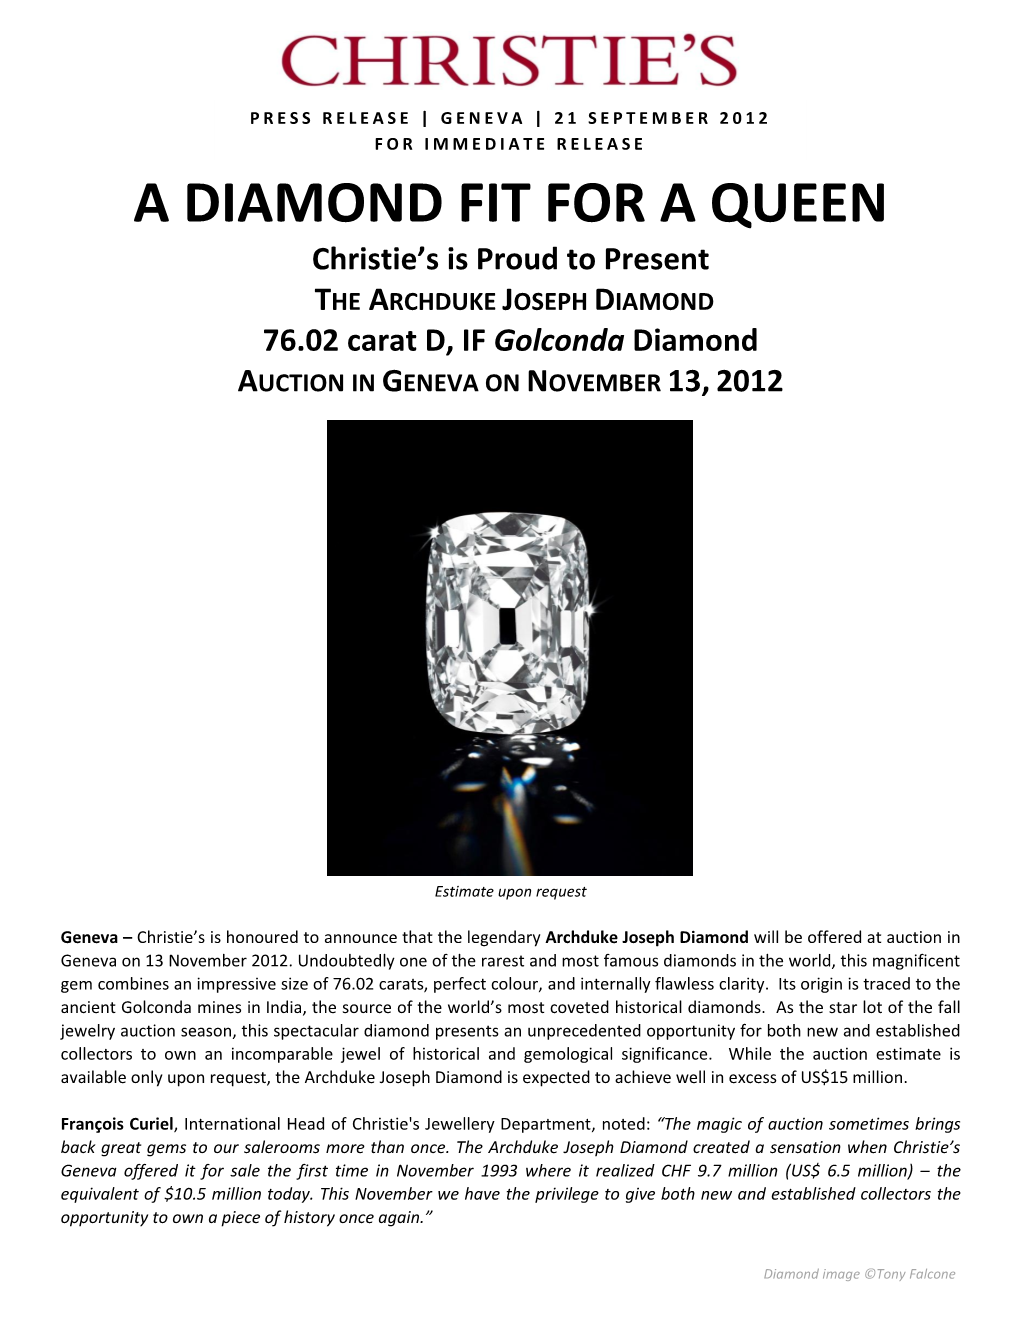 A DIAMOND FIT for a QUEEN Christie’S Is Proud to Present the ARCHDUKE JOSEPH DIAMOND 76.02 Carat D, IF Golconda Diamond AUCTION in GENEVA on NOVEMBER 13, 2012